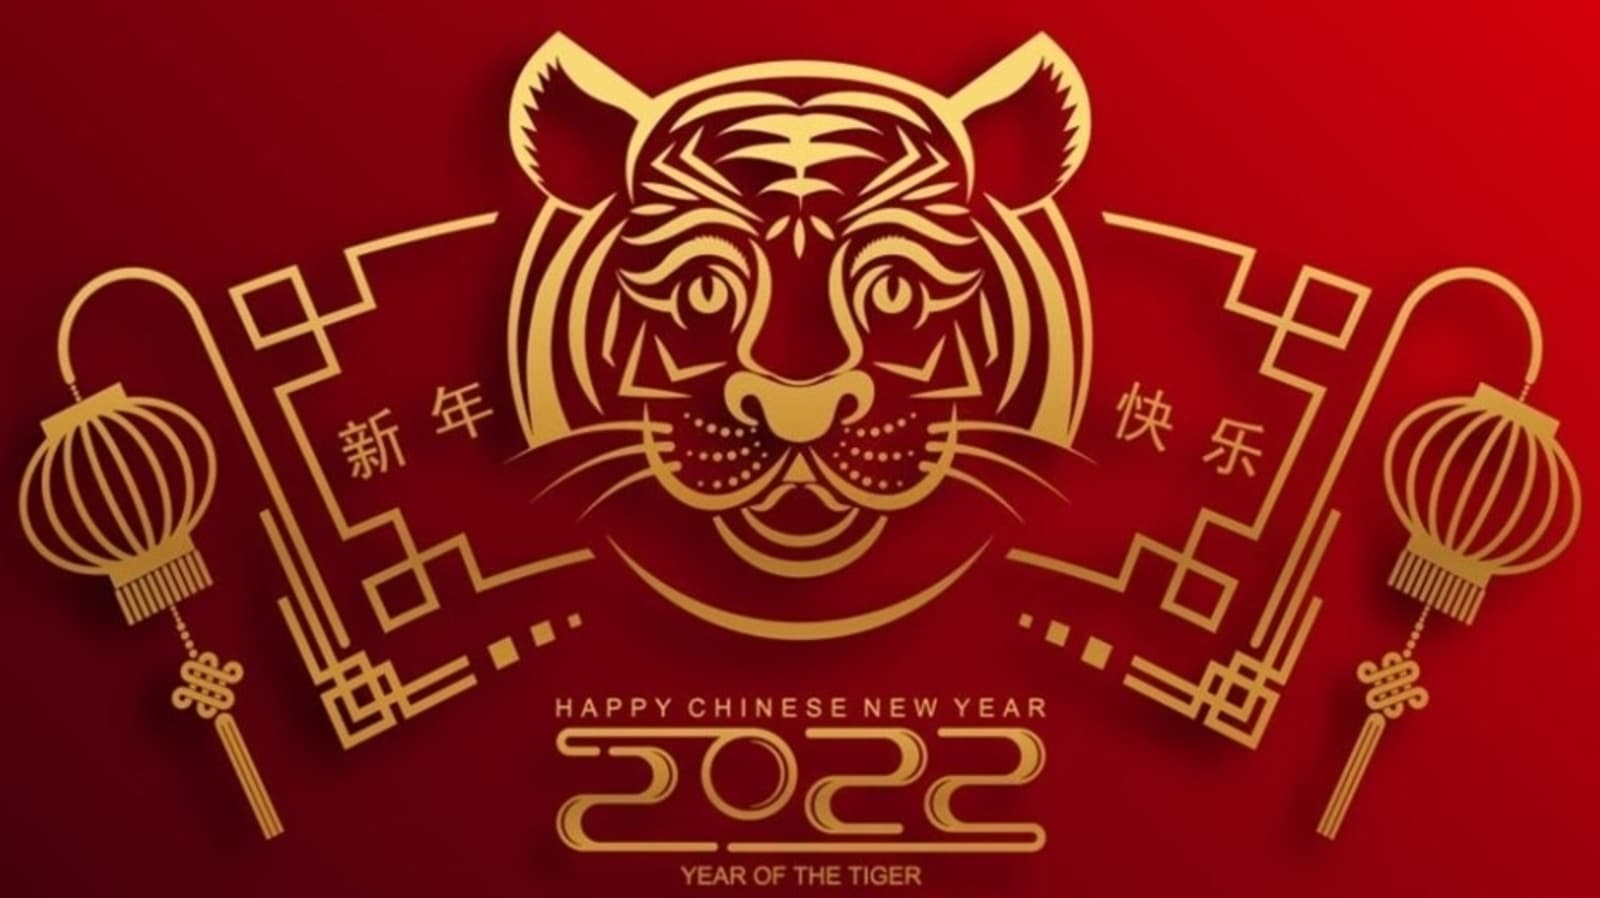 what is the purpose of chinese new year